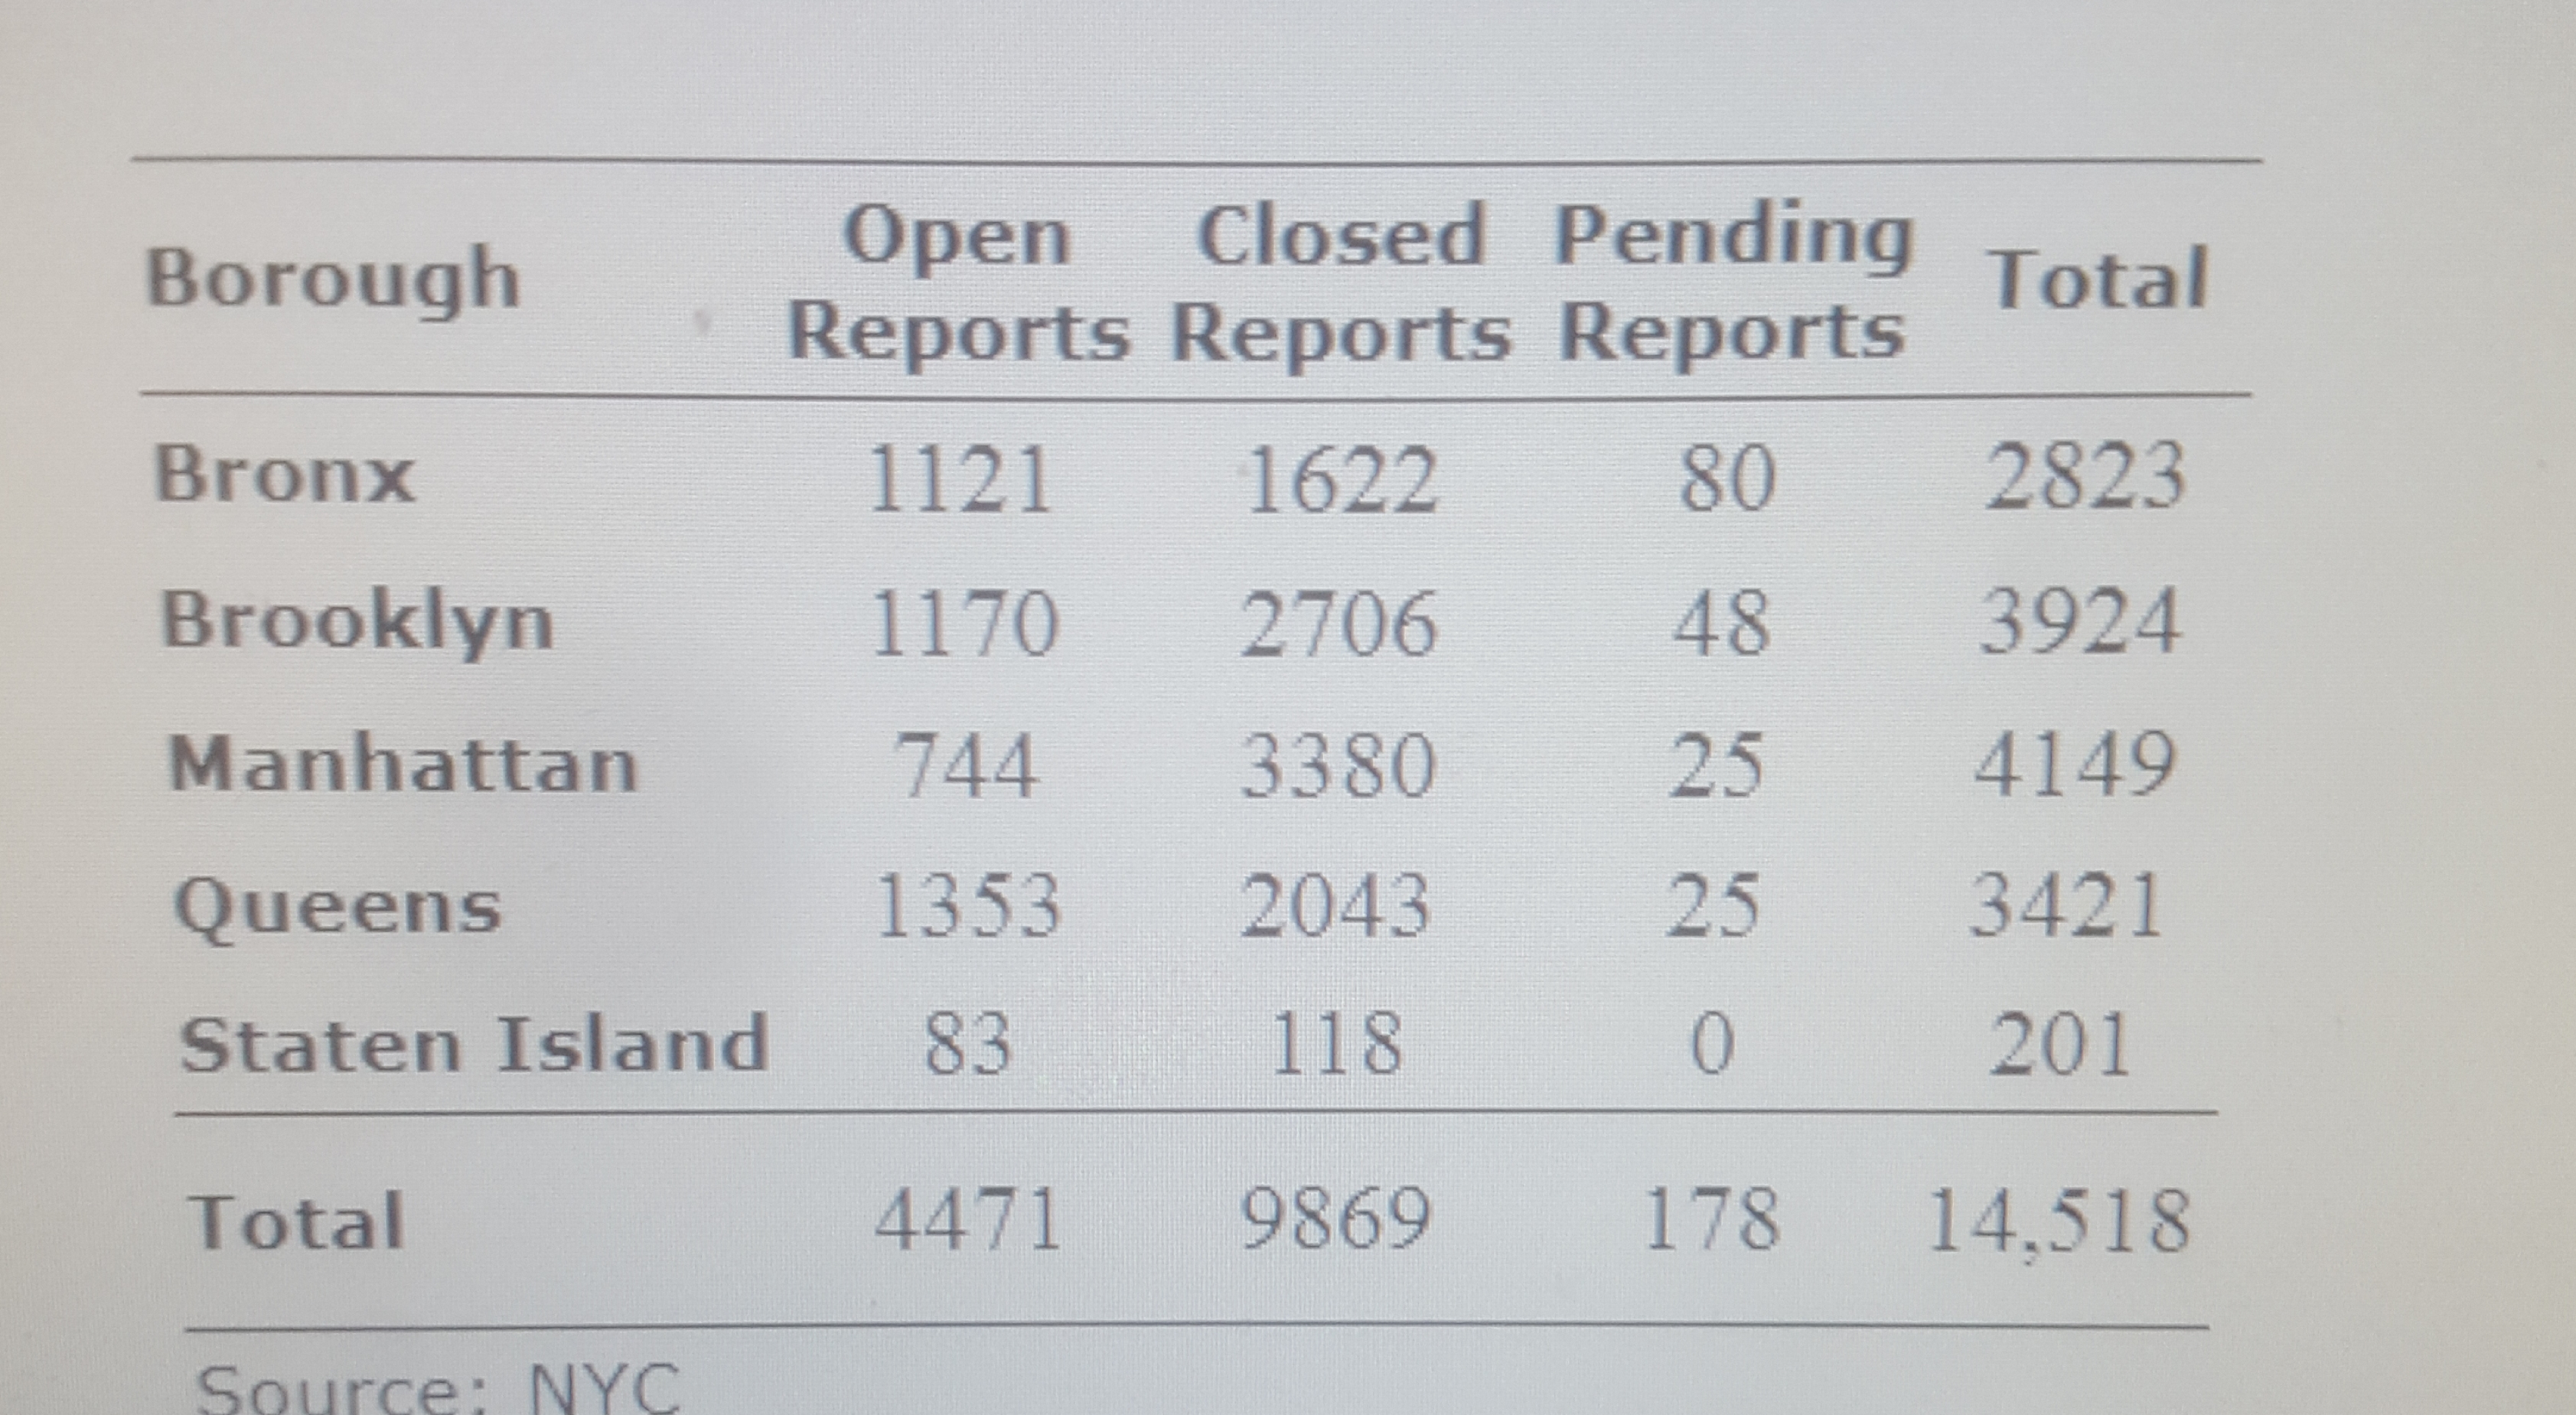 Closed Pending
Оpen
Reports Reports Reports
Borough
Total
2823
80
1121
Bronx
1622
Brooklyn
3924
48
1170
2706
Manhattan
744
3380
25
4149
2043
3421
25
1353
Queens
83
118
0
201
Staten Island
9869
178
4471
14,518
Total
Source: NYC
